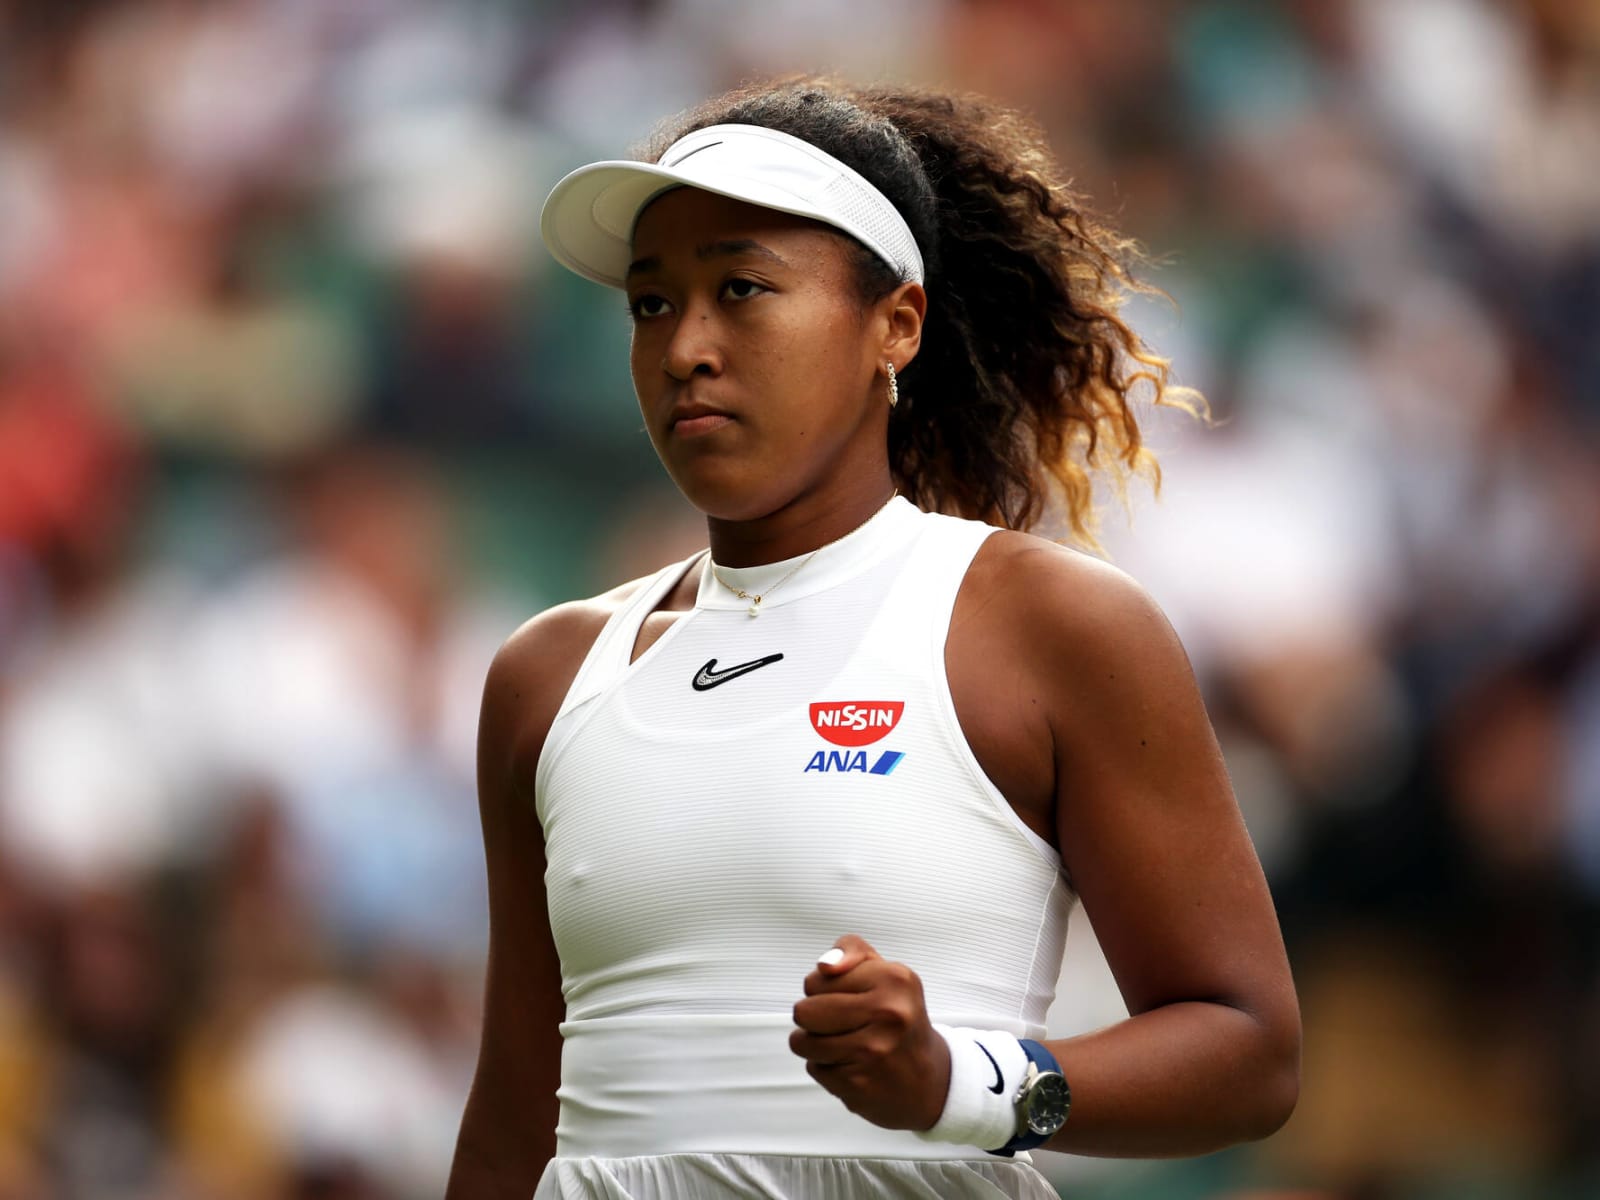 Naomi Osaka gorgeous and honored to grace the cover of the